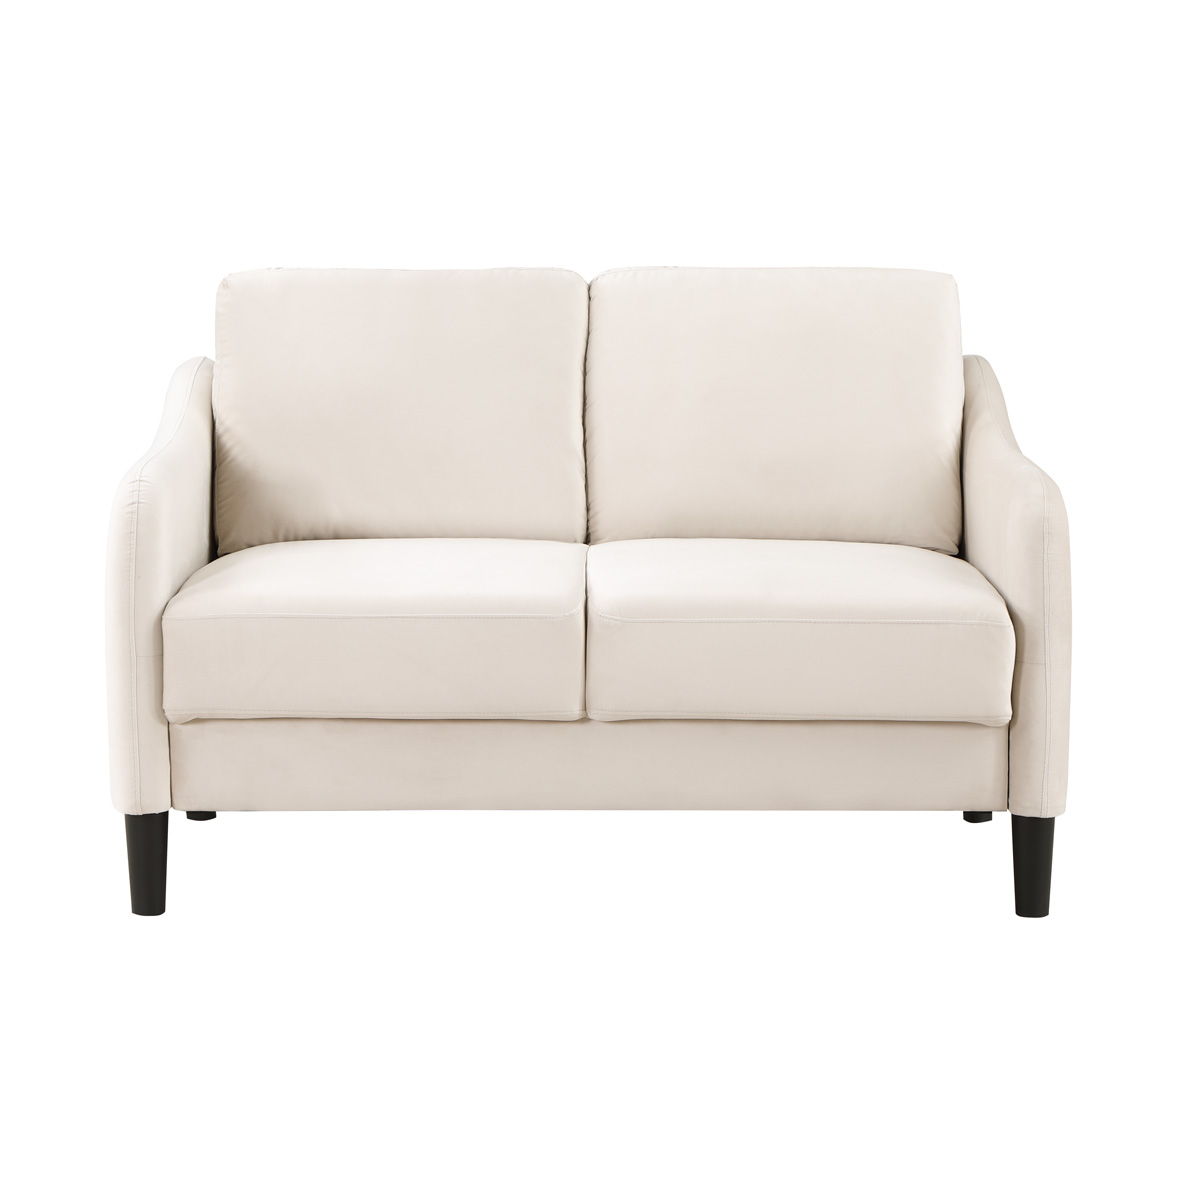 51.5" Loveseat Sofa Small Couch For Small Space For Living Room, Bedroom, Beige